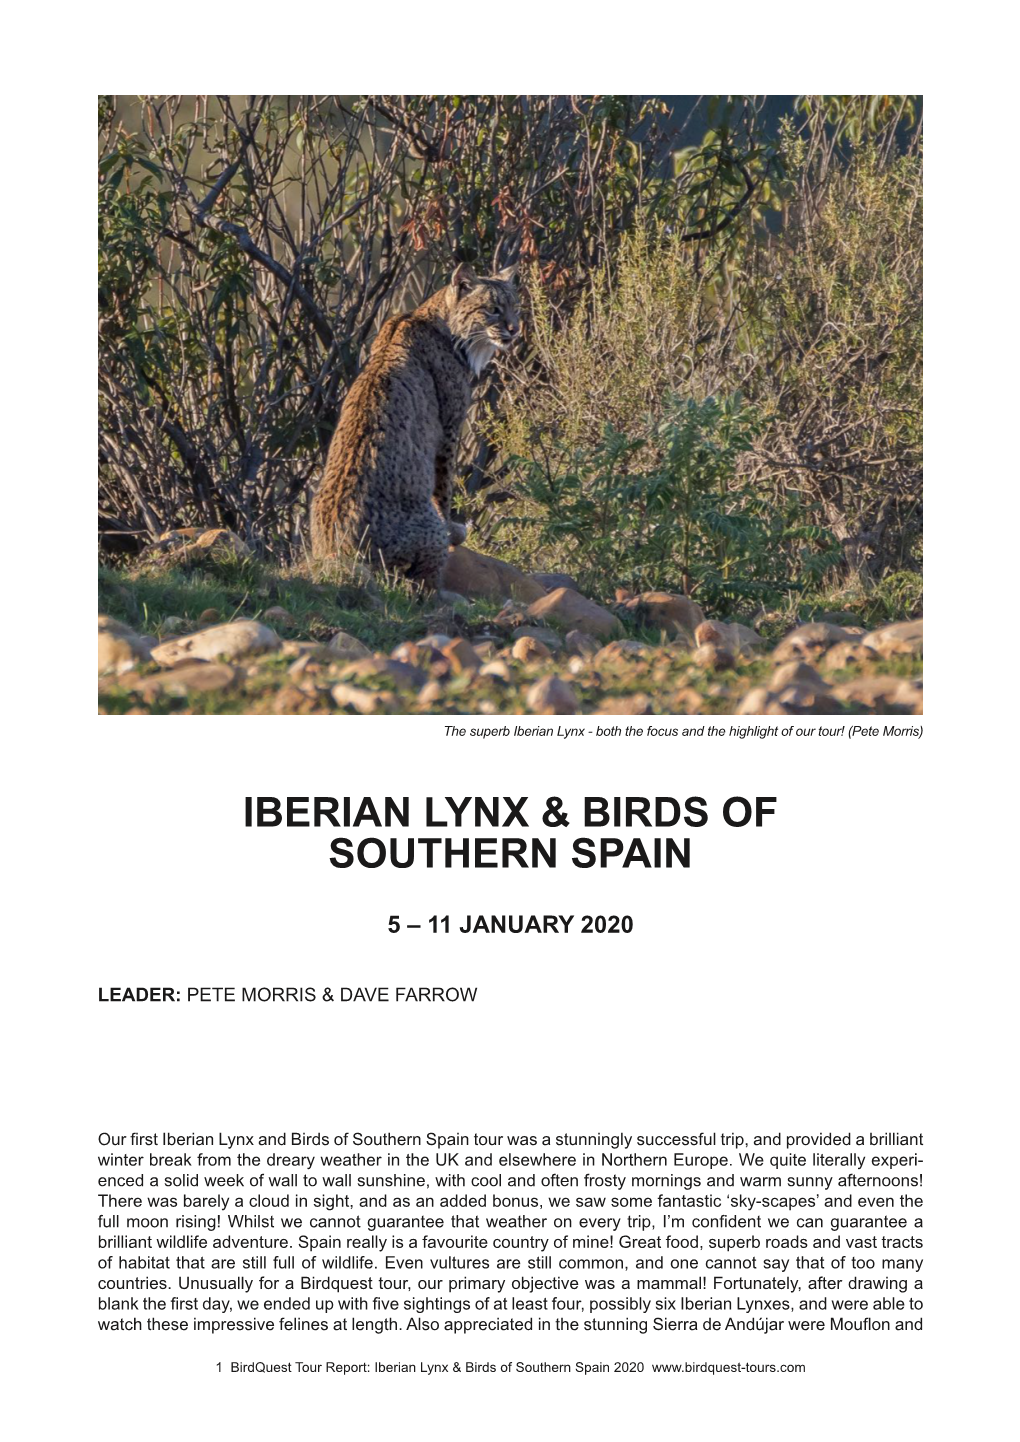 Iberian Lynx & Birds of Southern Spain Tour Report 2020